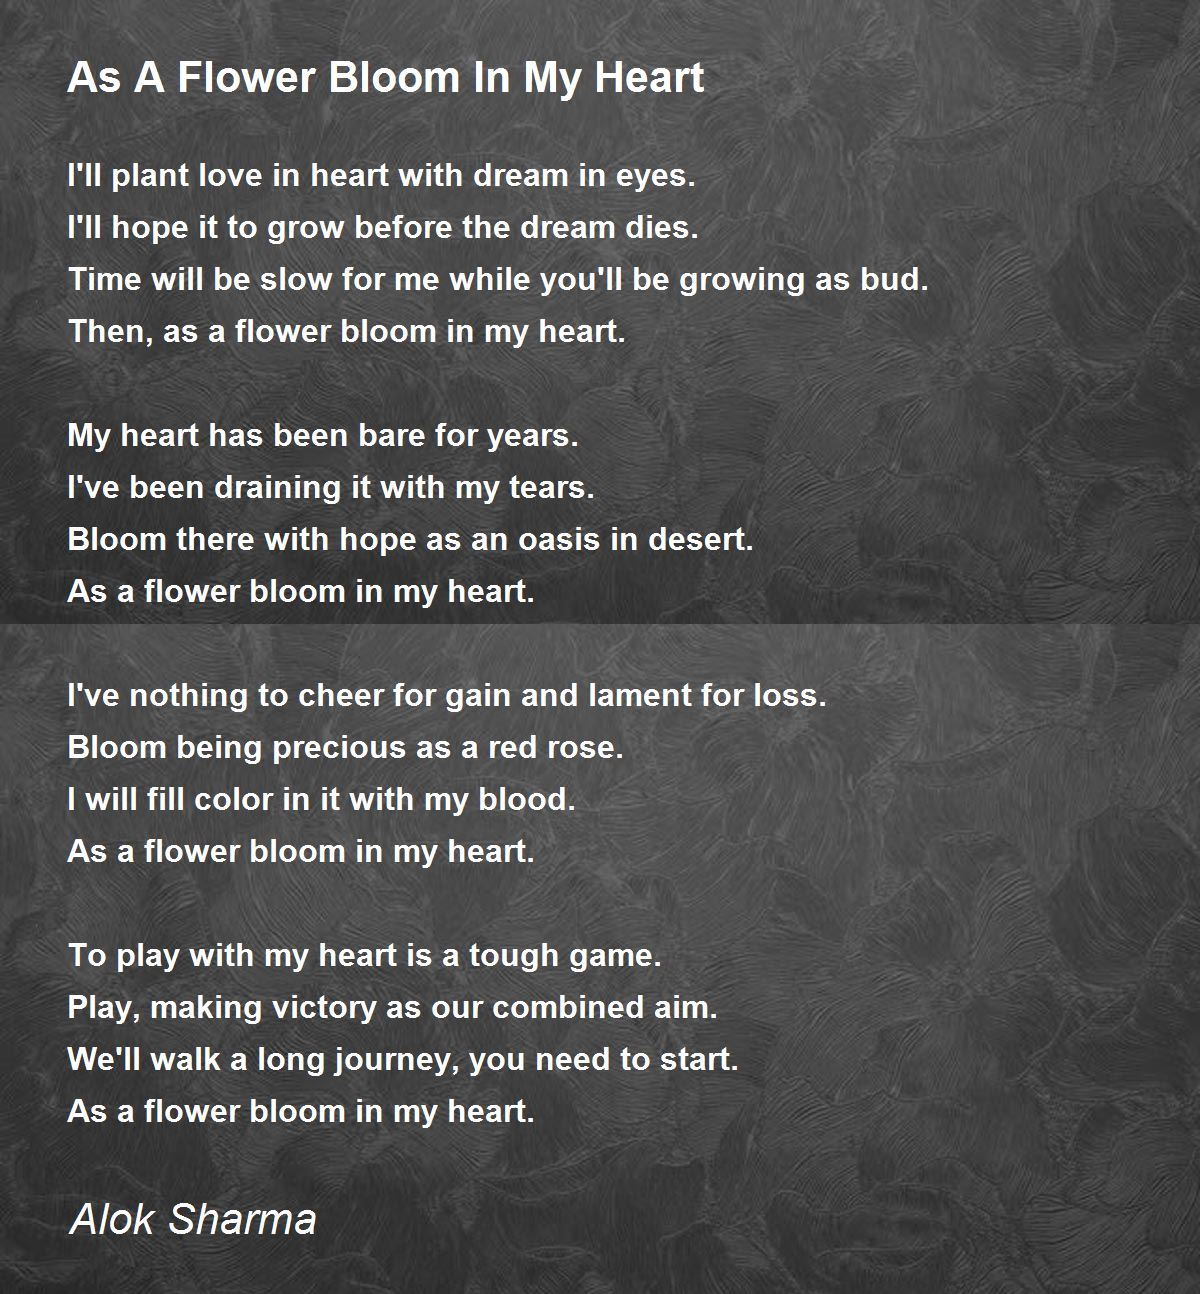 Your Heart In Bloom, About Hoffman